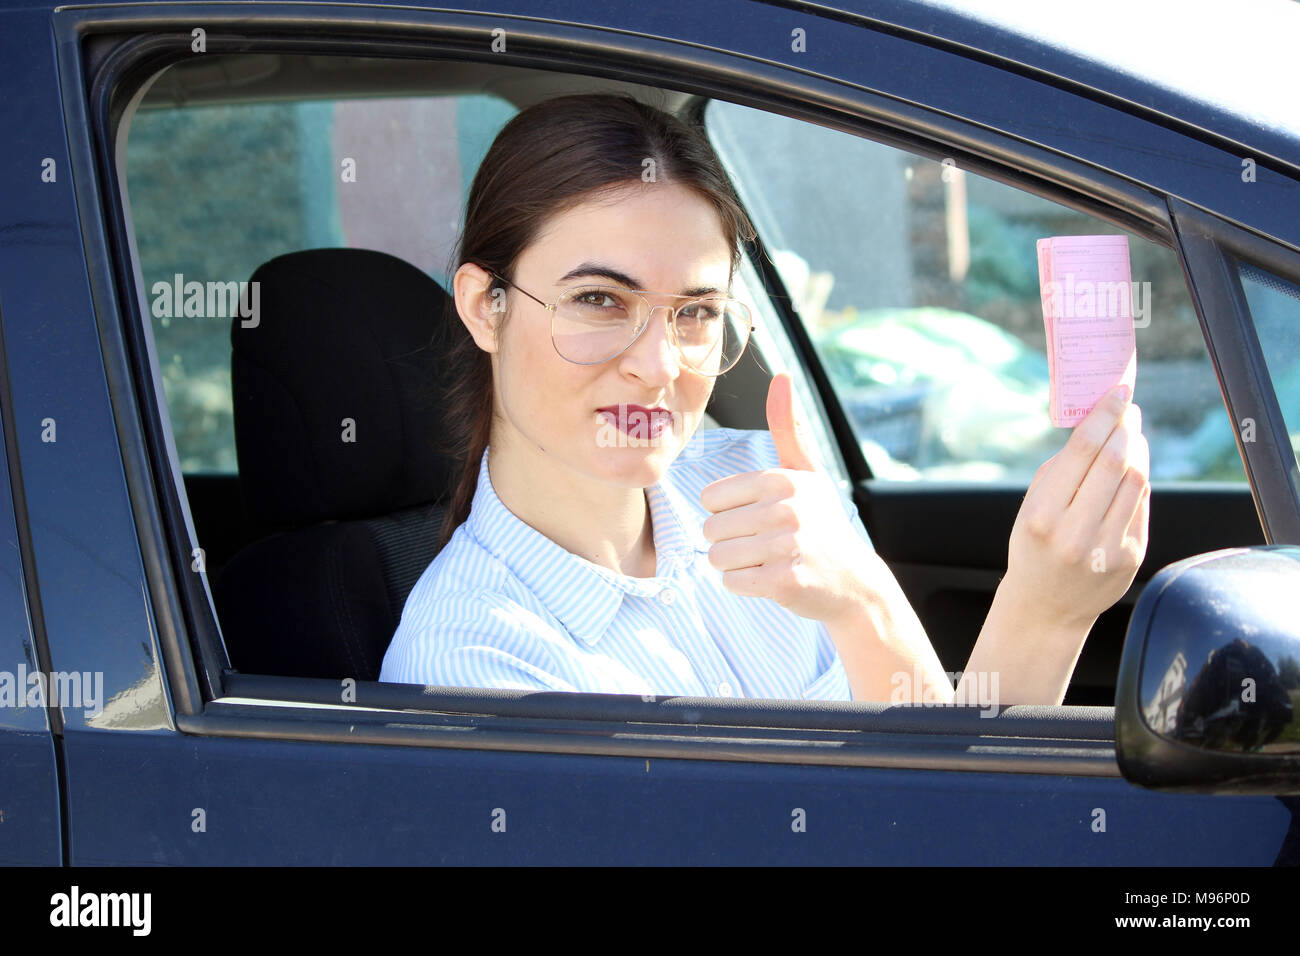 young driver showing driving licence Stock Photo